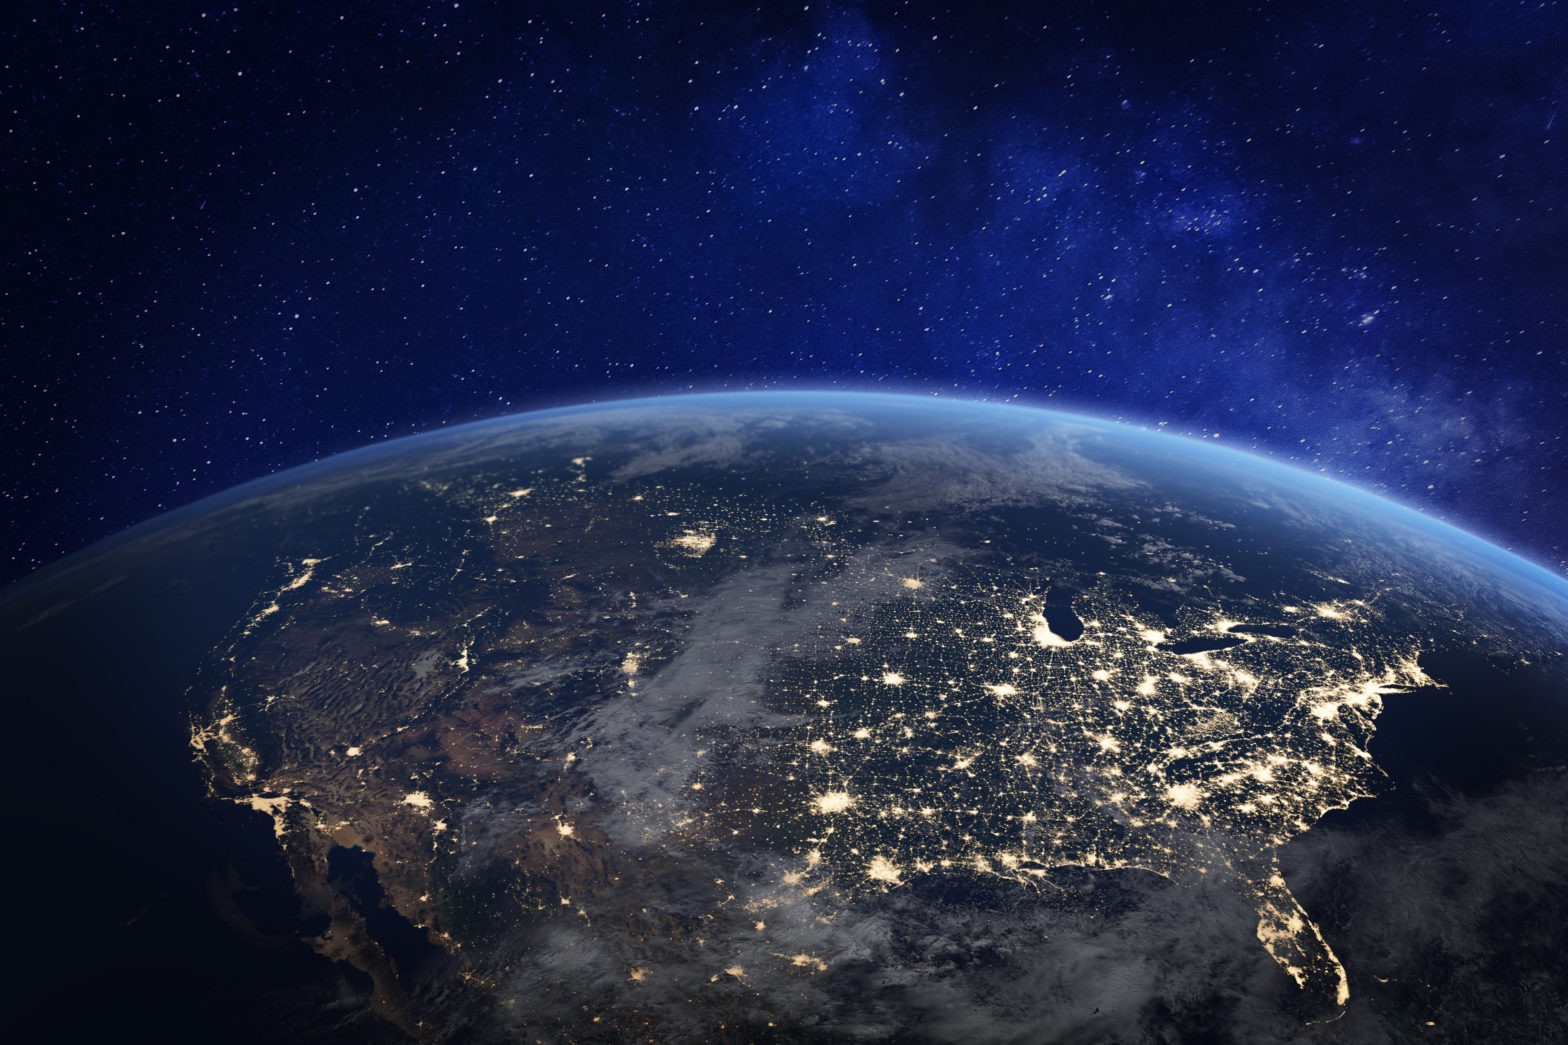 North America at night viewed from space with city lights showin